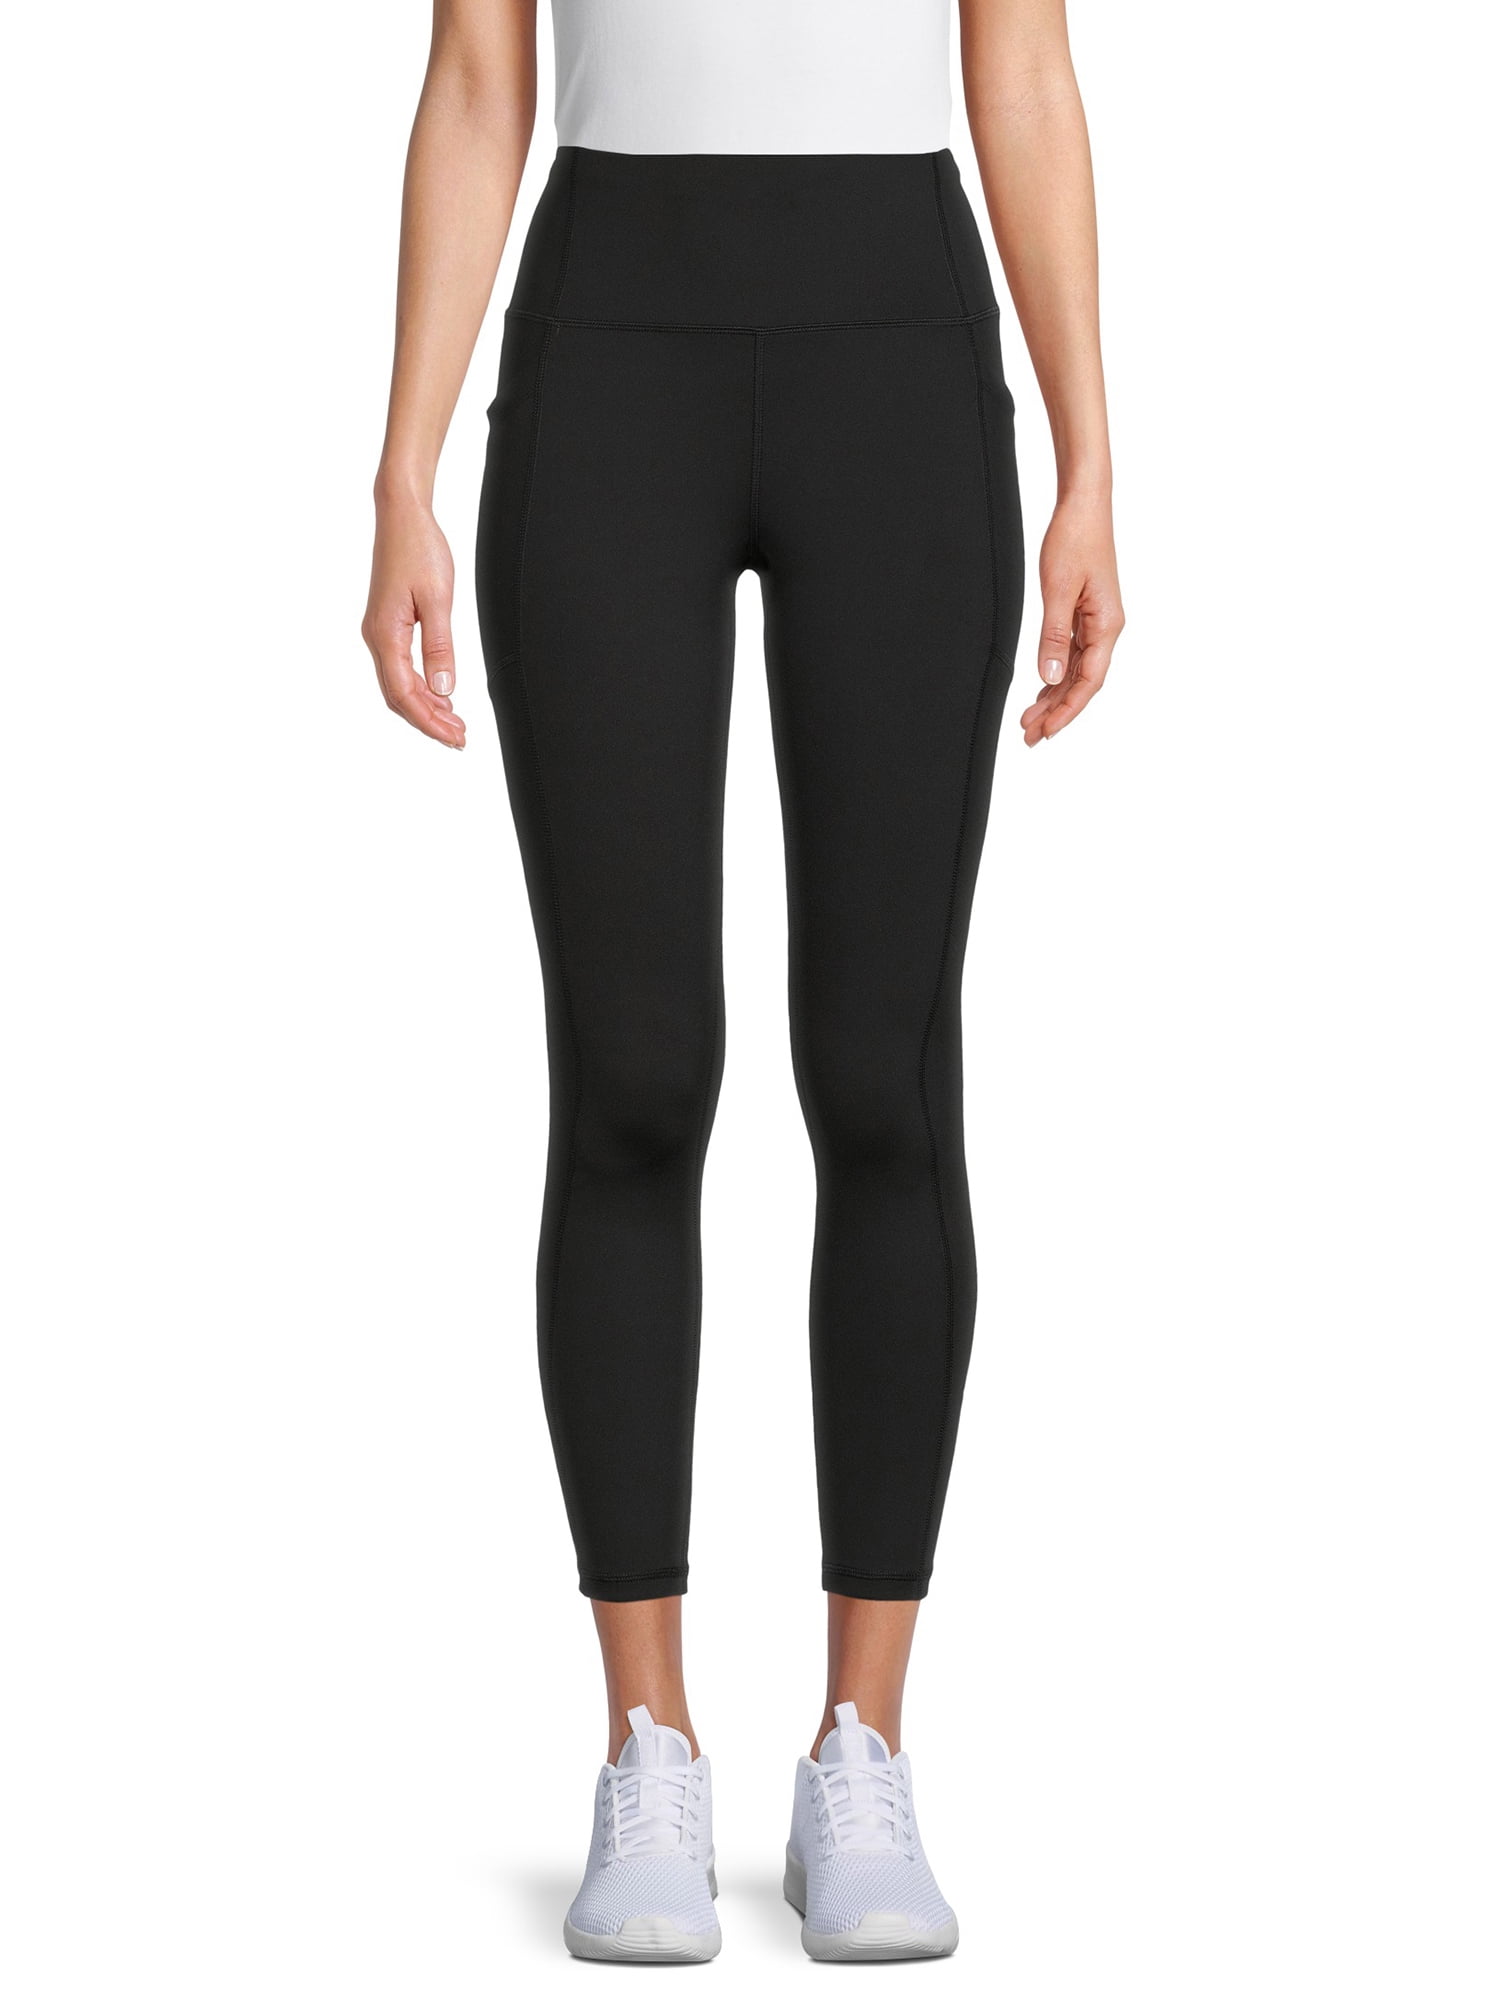 Avia Women's 25" Length High Rise Crop Legging with Side Pockets